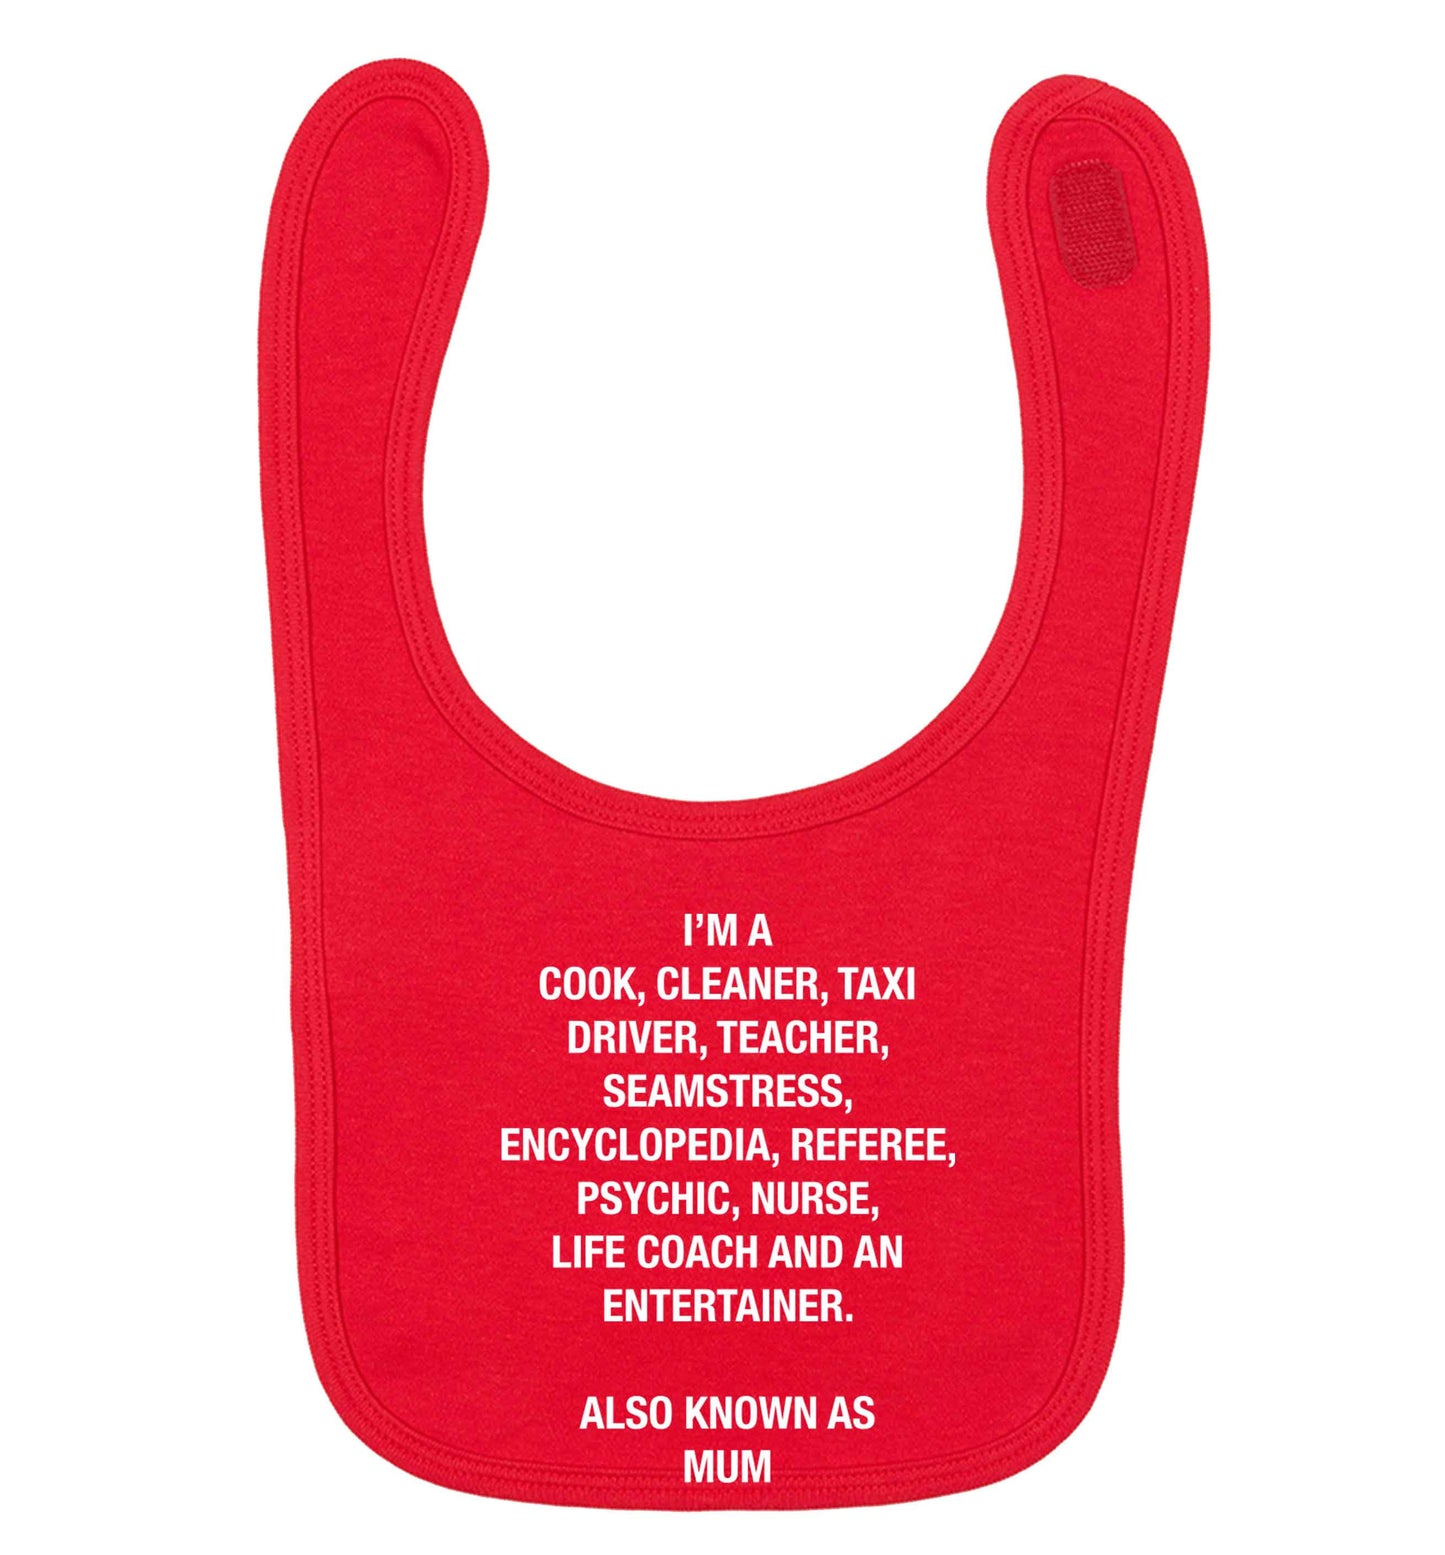 Funny gifts for your mum on mother's dayor her birthday! Mum, cook, cleaner, taxi driver, teacher, seamstress, encyclopedia, referee, psychic, nurse, life coach and entertainer red baby bib